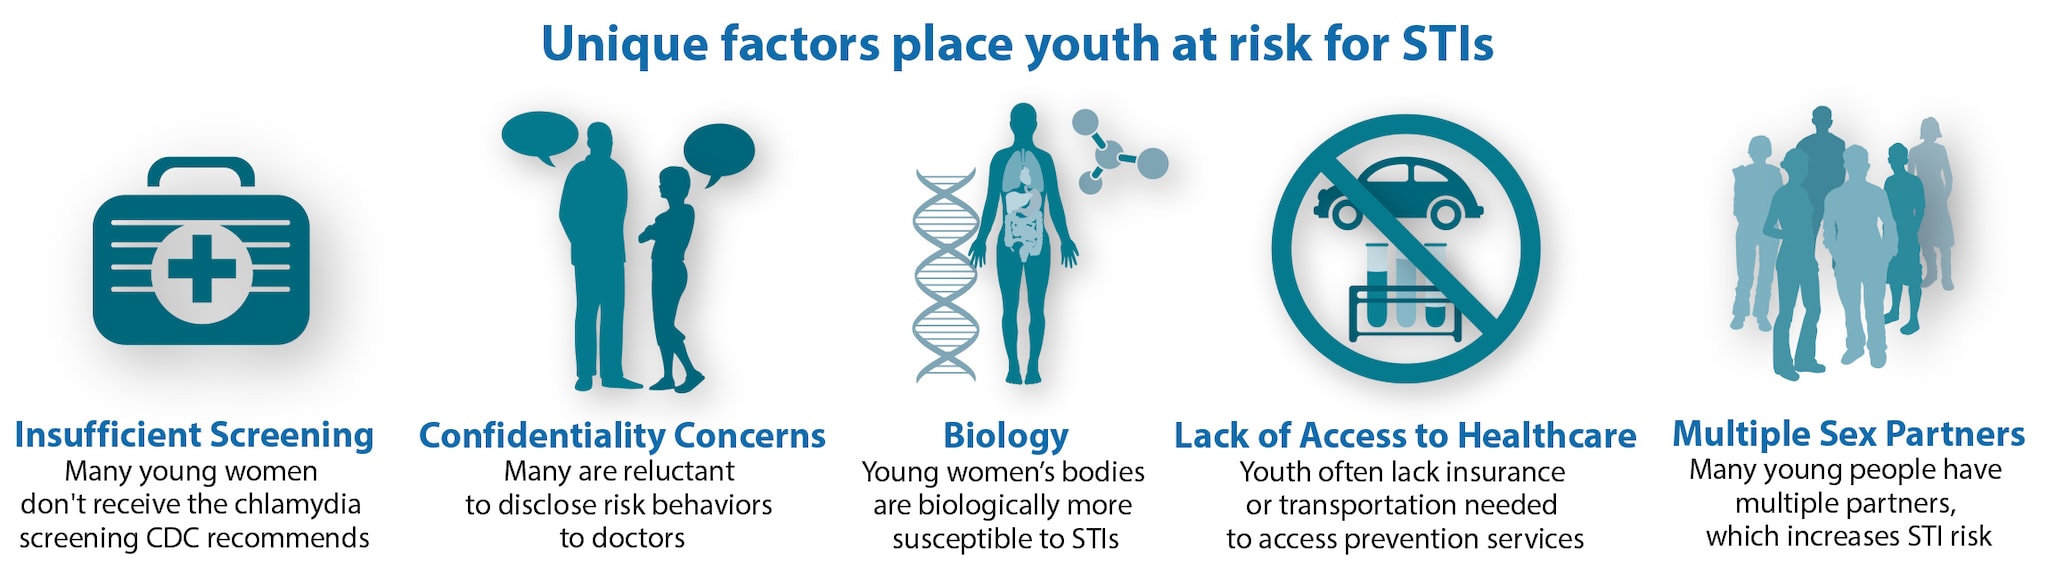 A range of unique factors place youth at risk for infection. Many young women don’t receive the chlamydia screening CDC recommends. Many youth are reluctant to disclose risk behaviors to doctors. Young women’s bodies are biologically more susceptible to sexually transmitted infections. Youth often lack insurance or transportation needed to access prevention services. And many young people have multiple partners which increases STI risk.